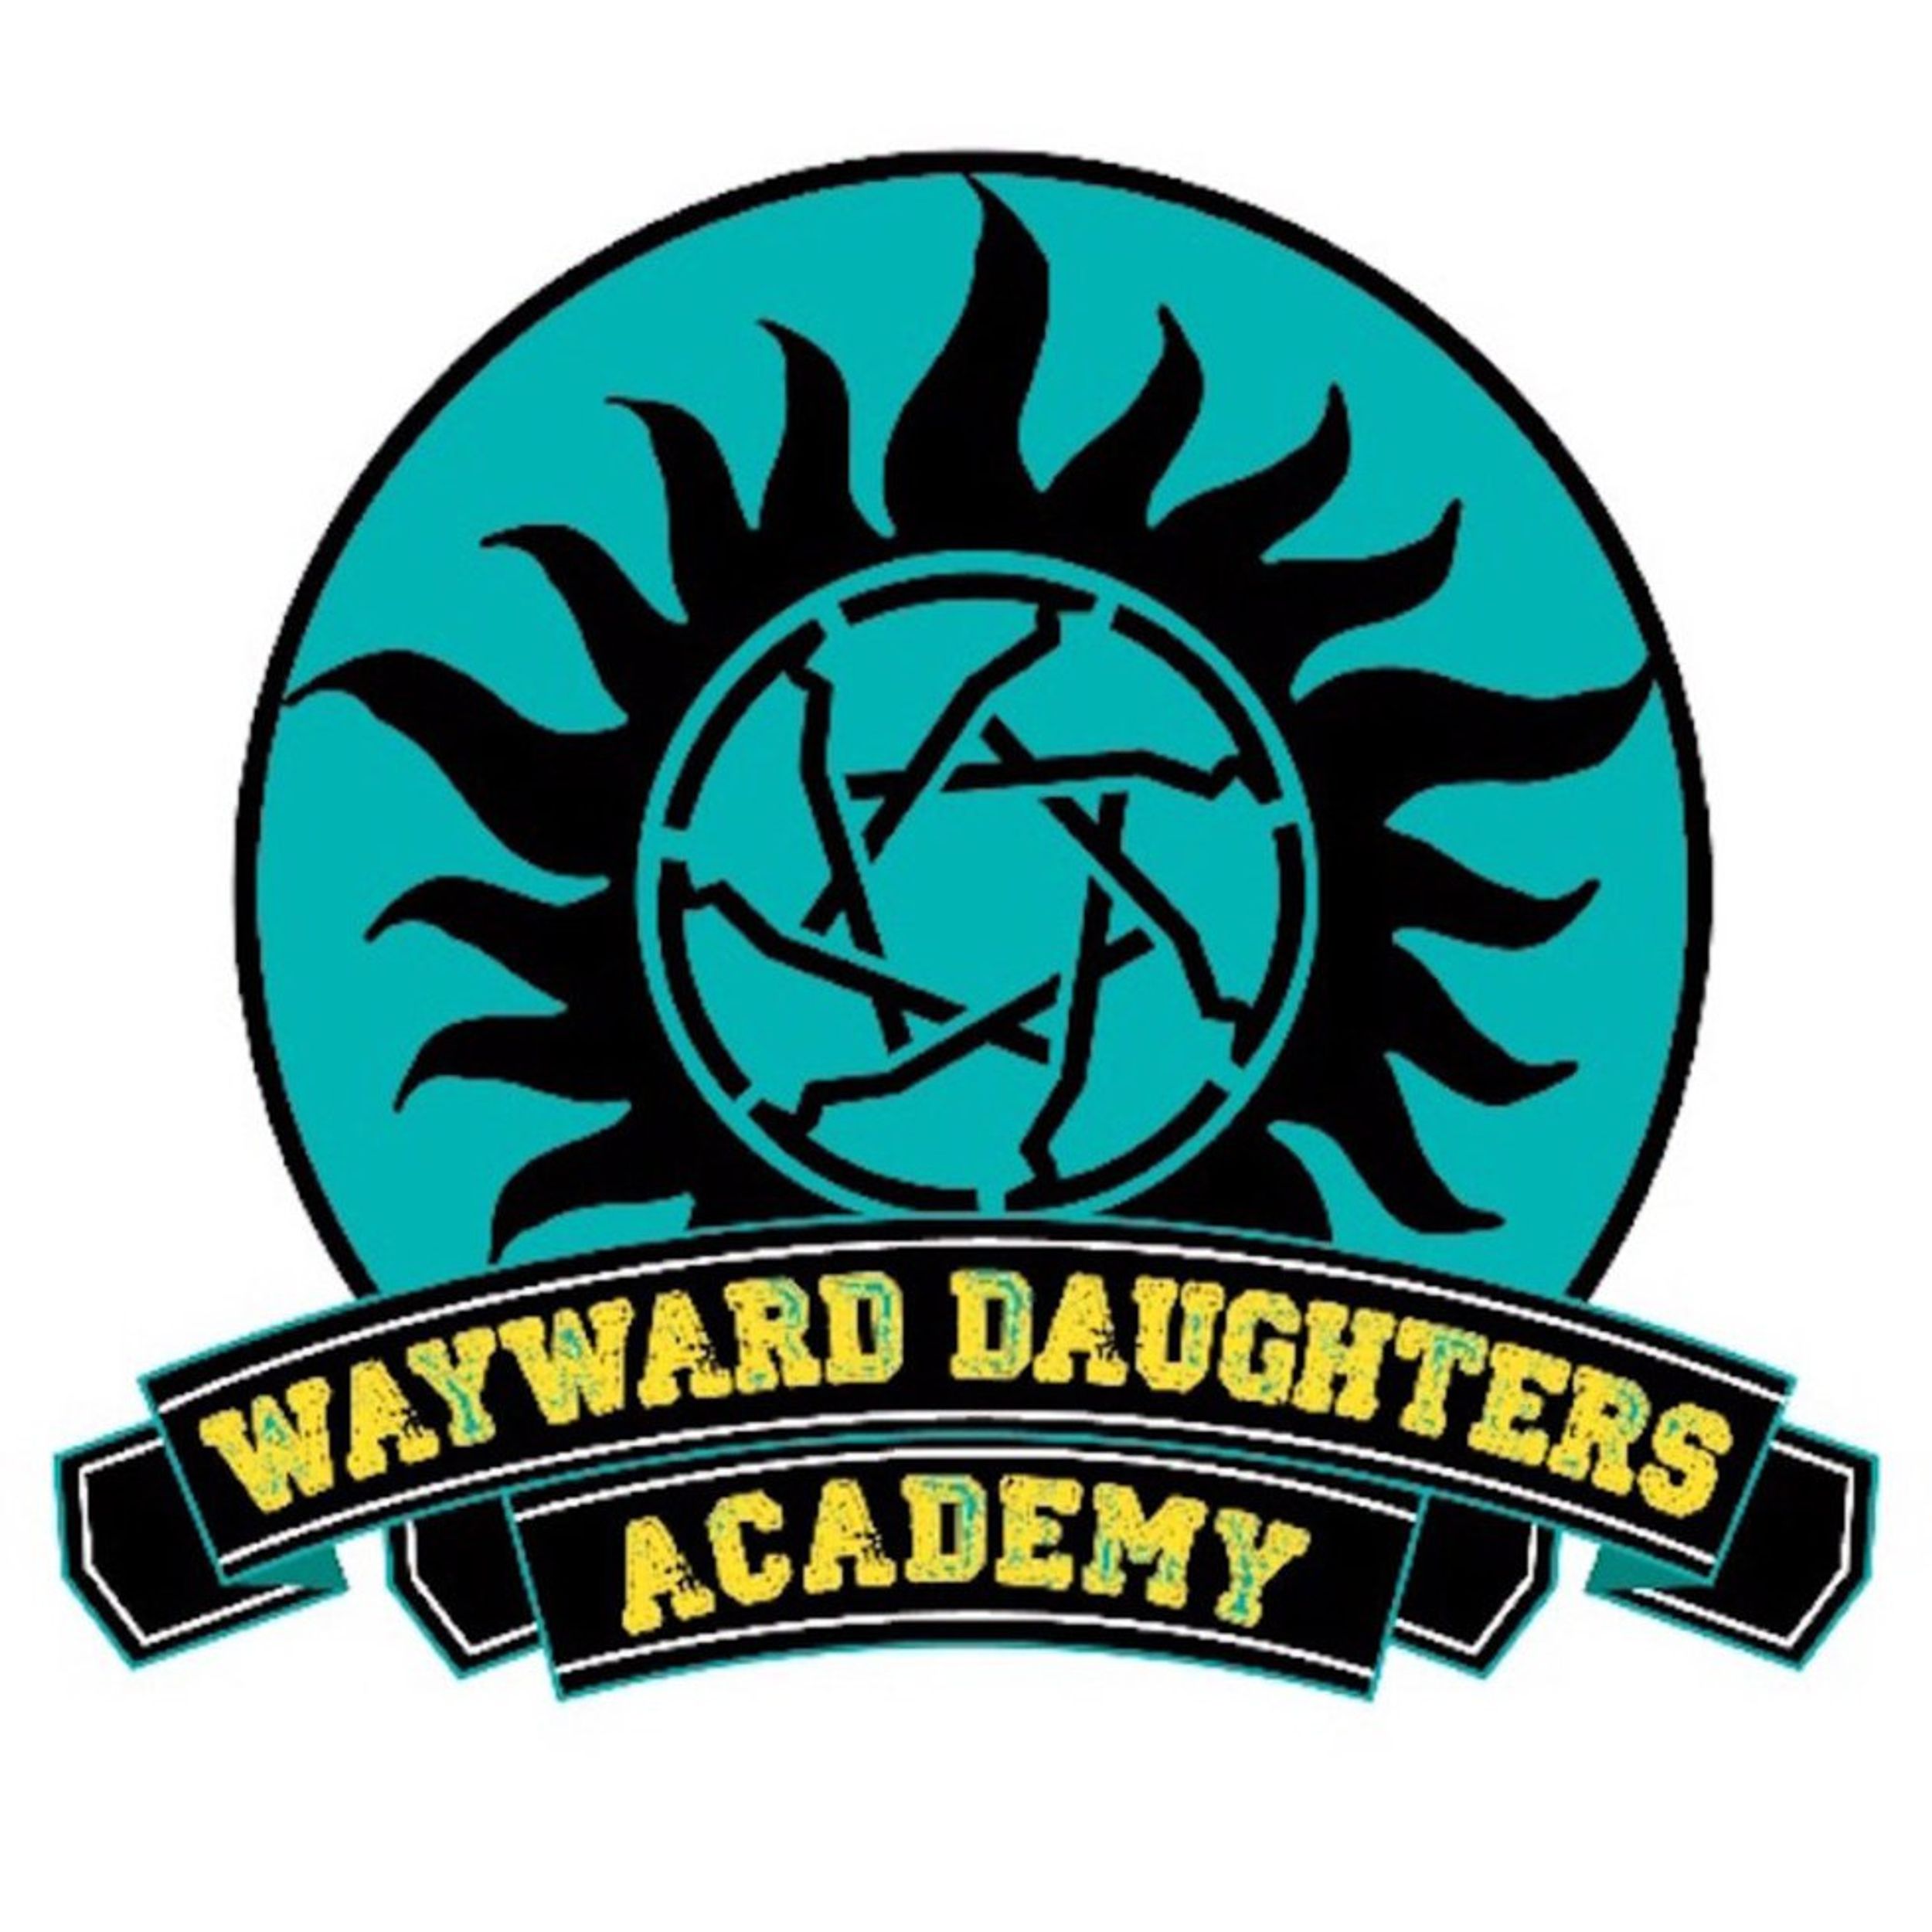 'The Wayward Daughters Academy' Campaign